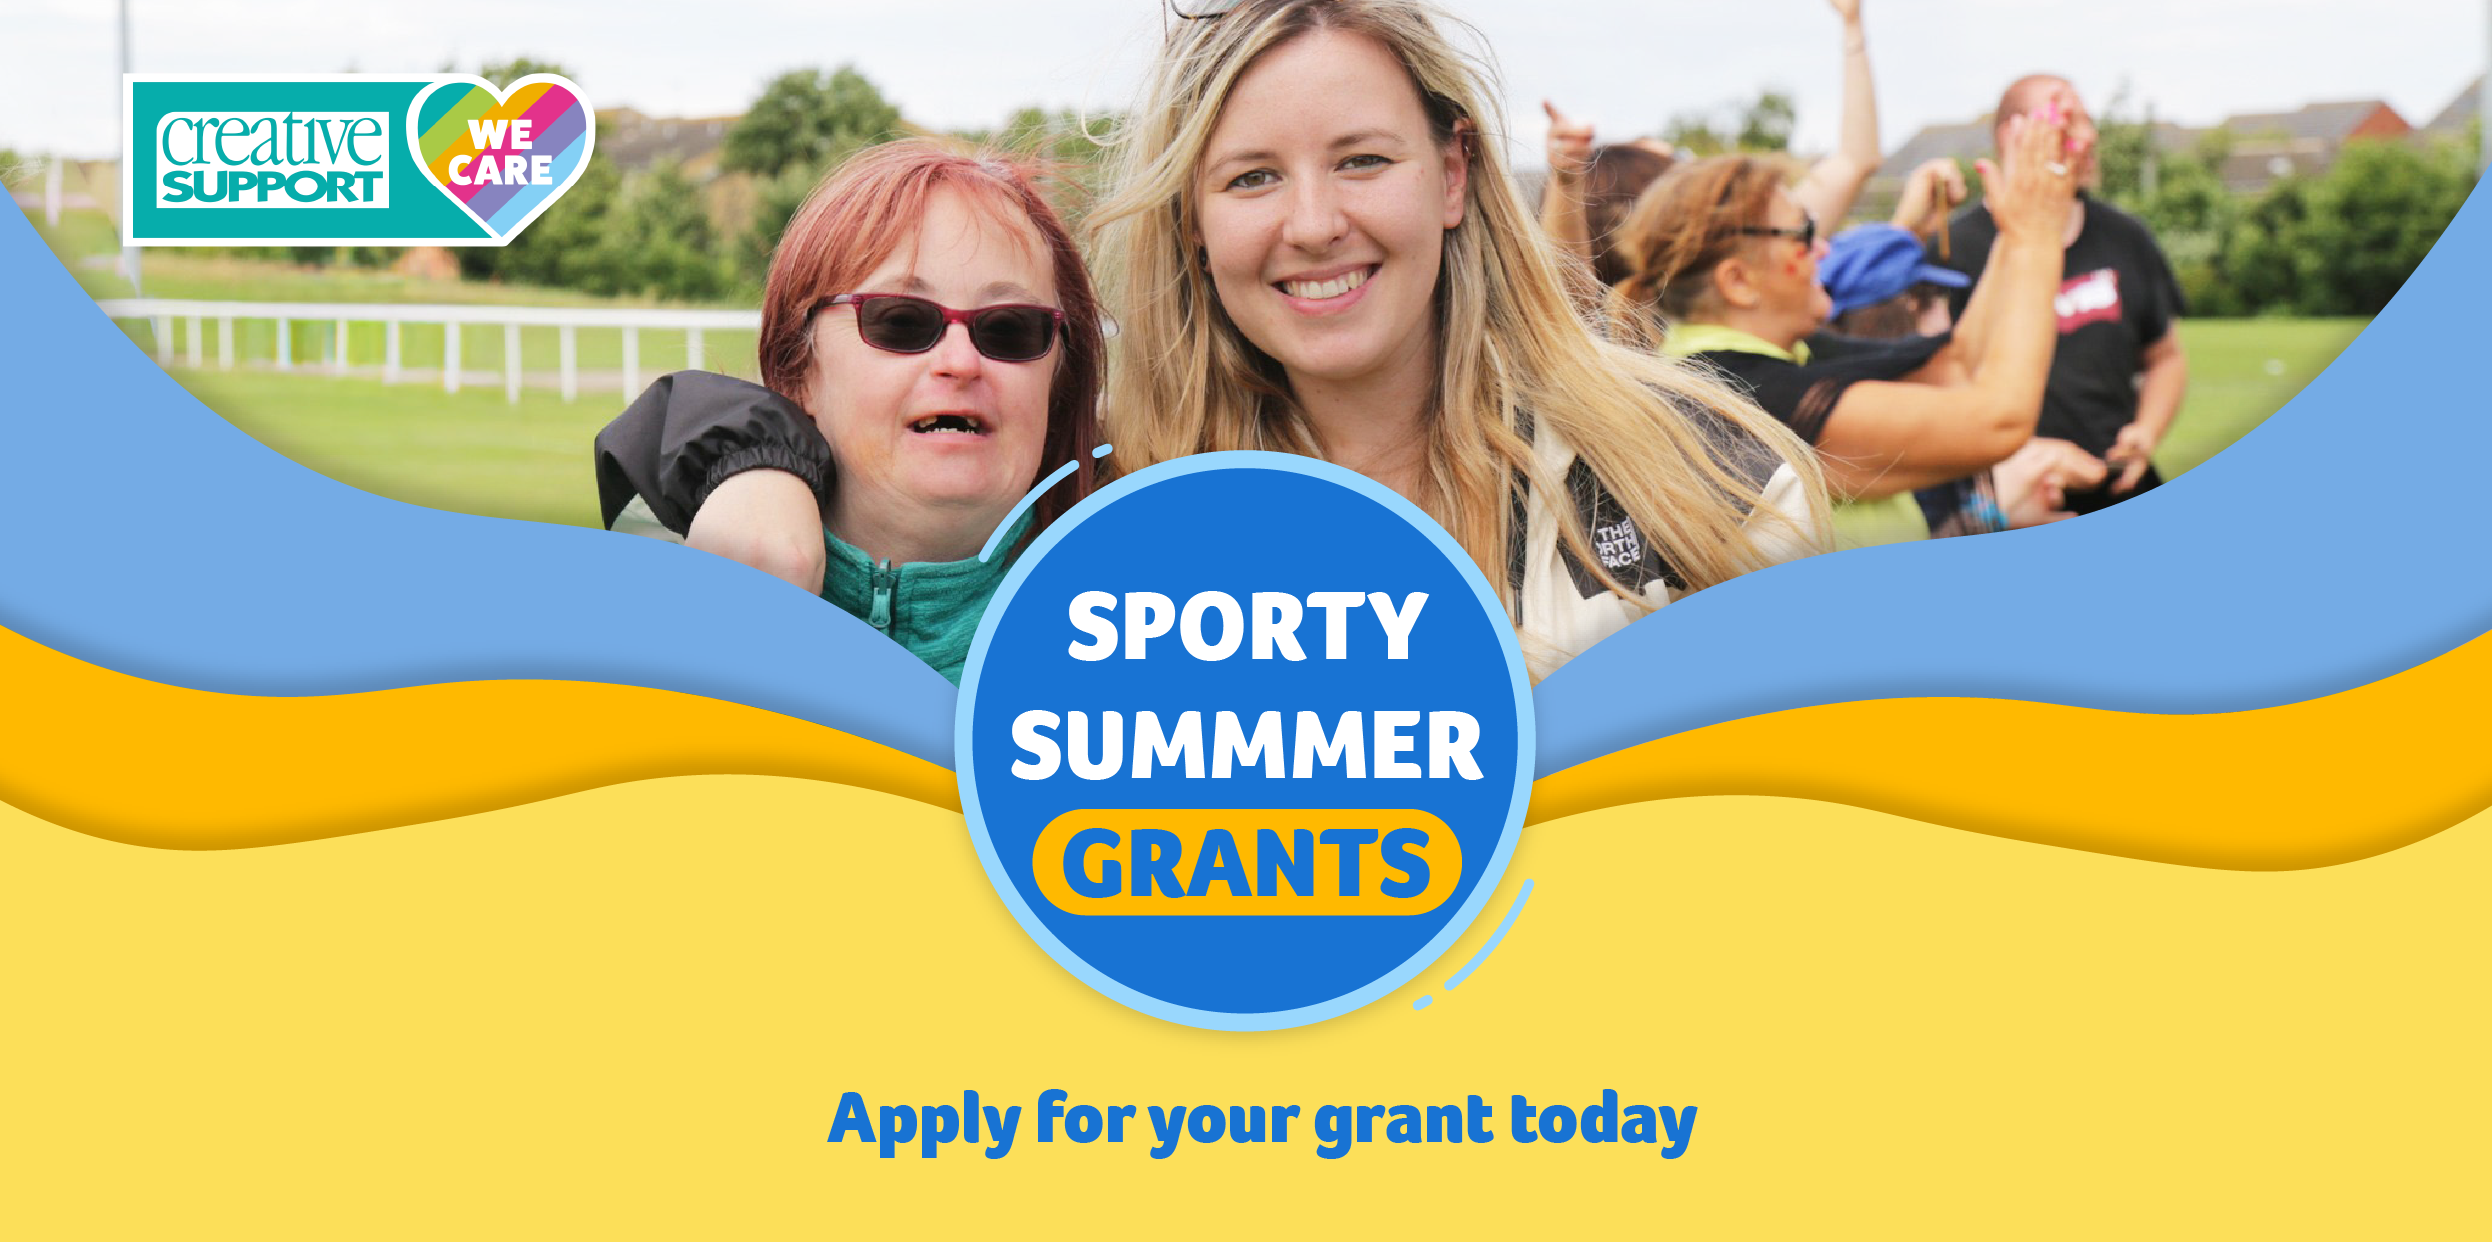 A blue, orange and yellow banner featuring the Creative Support logo, text that says 'Sporty Summer Grants' in white overlaid onto a blue circle, text in blue which says 'Apply for your grant today', and a photo of a person we support and a staff member smiling, with a group of people clapping and cheering in the background.